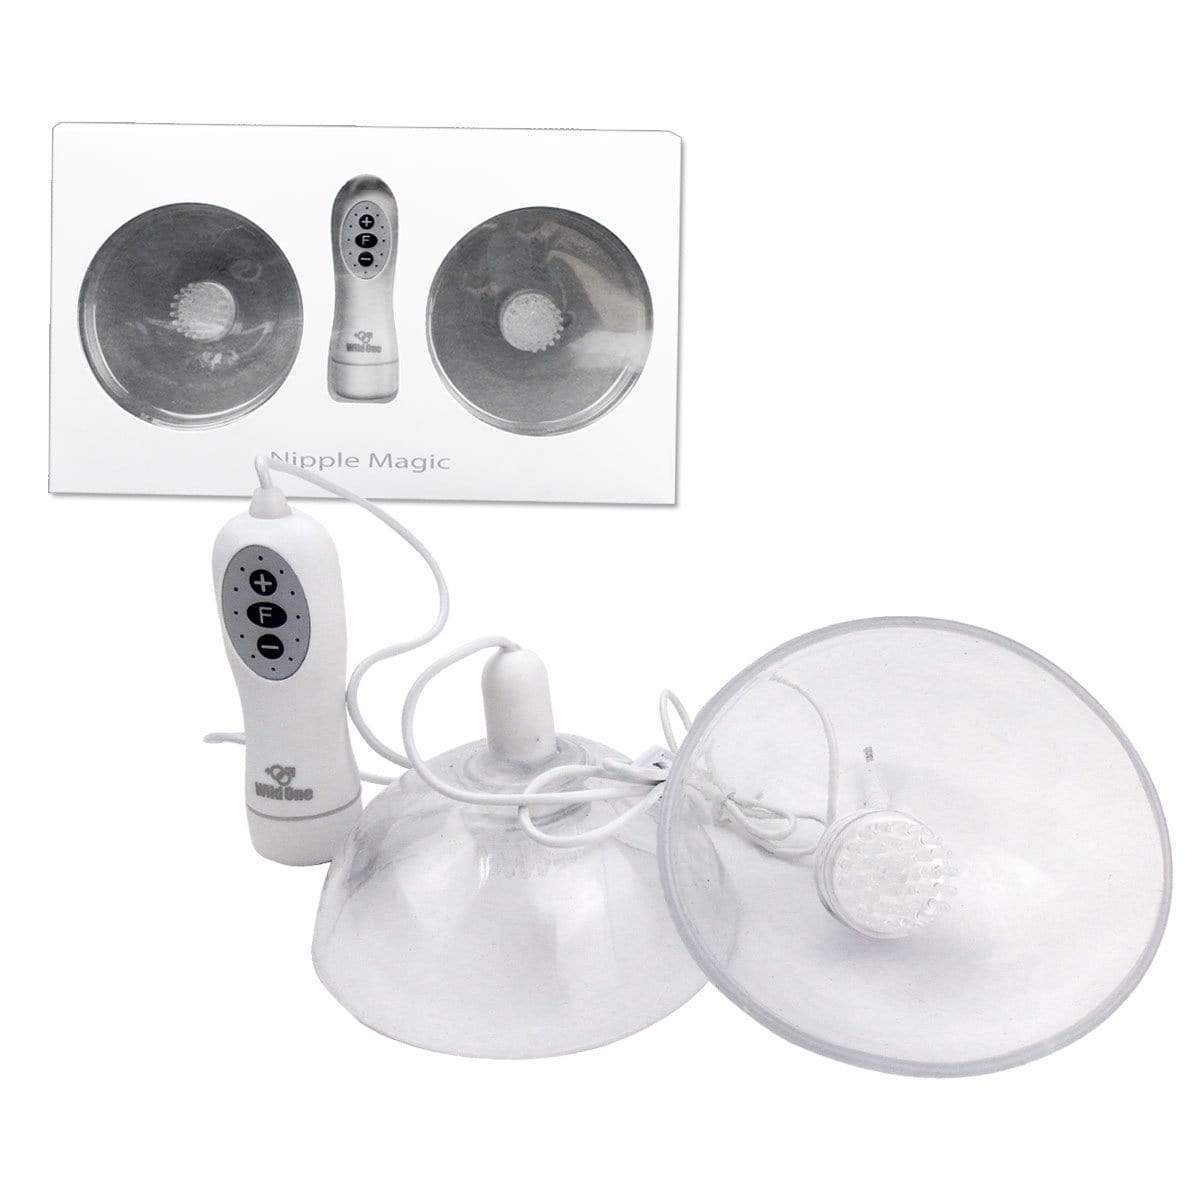 SSI Japan - Nipple Magic Breast Massager (White) Breast Massager (Vibration) Non Rechargeable 4582137933902 CherryAffairs